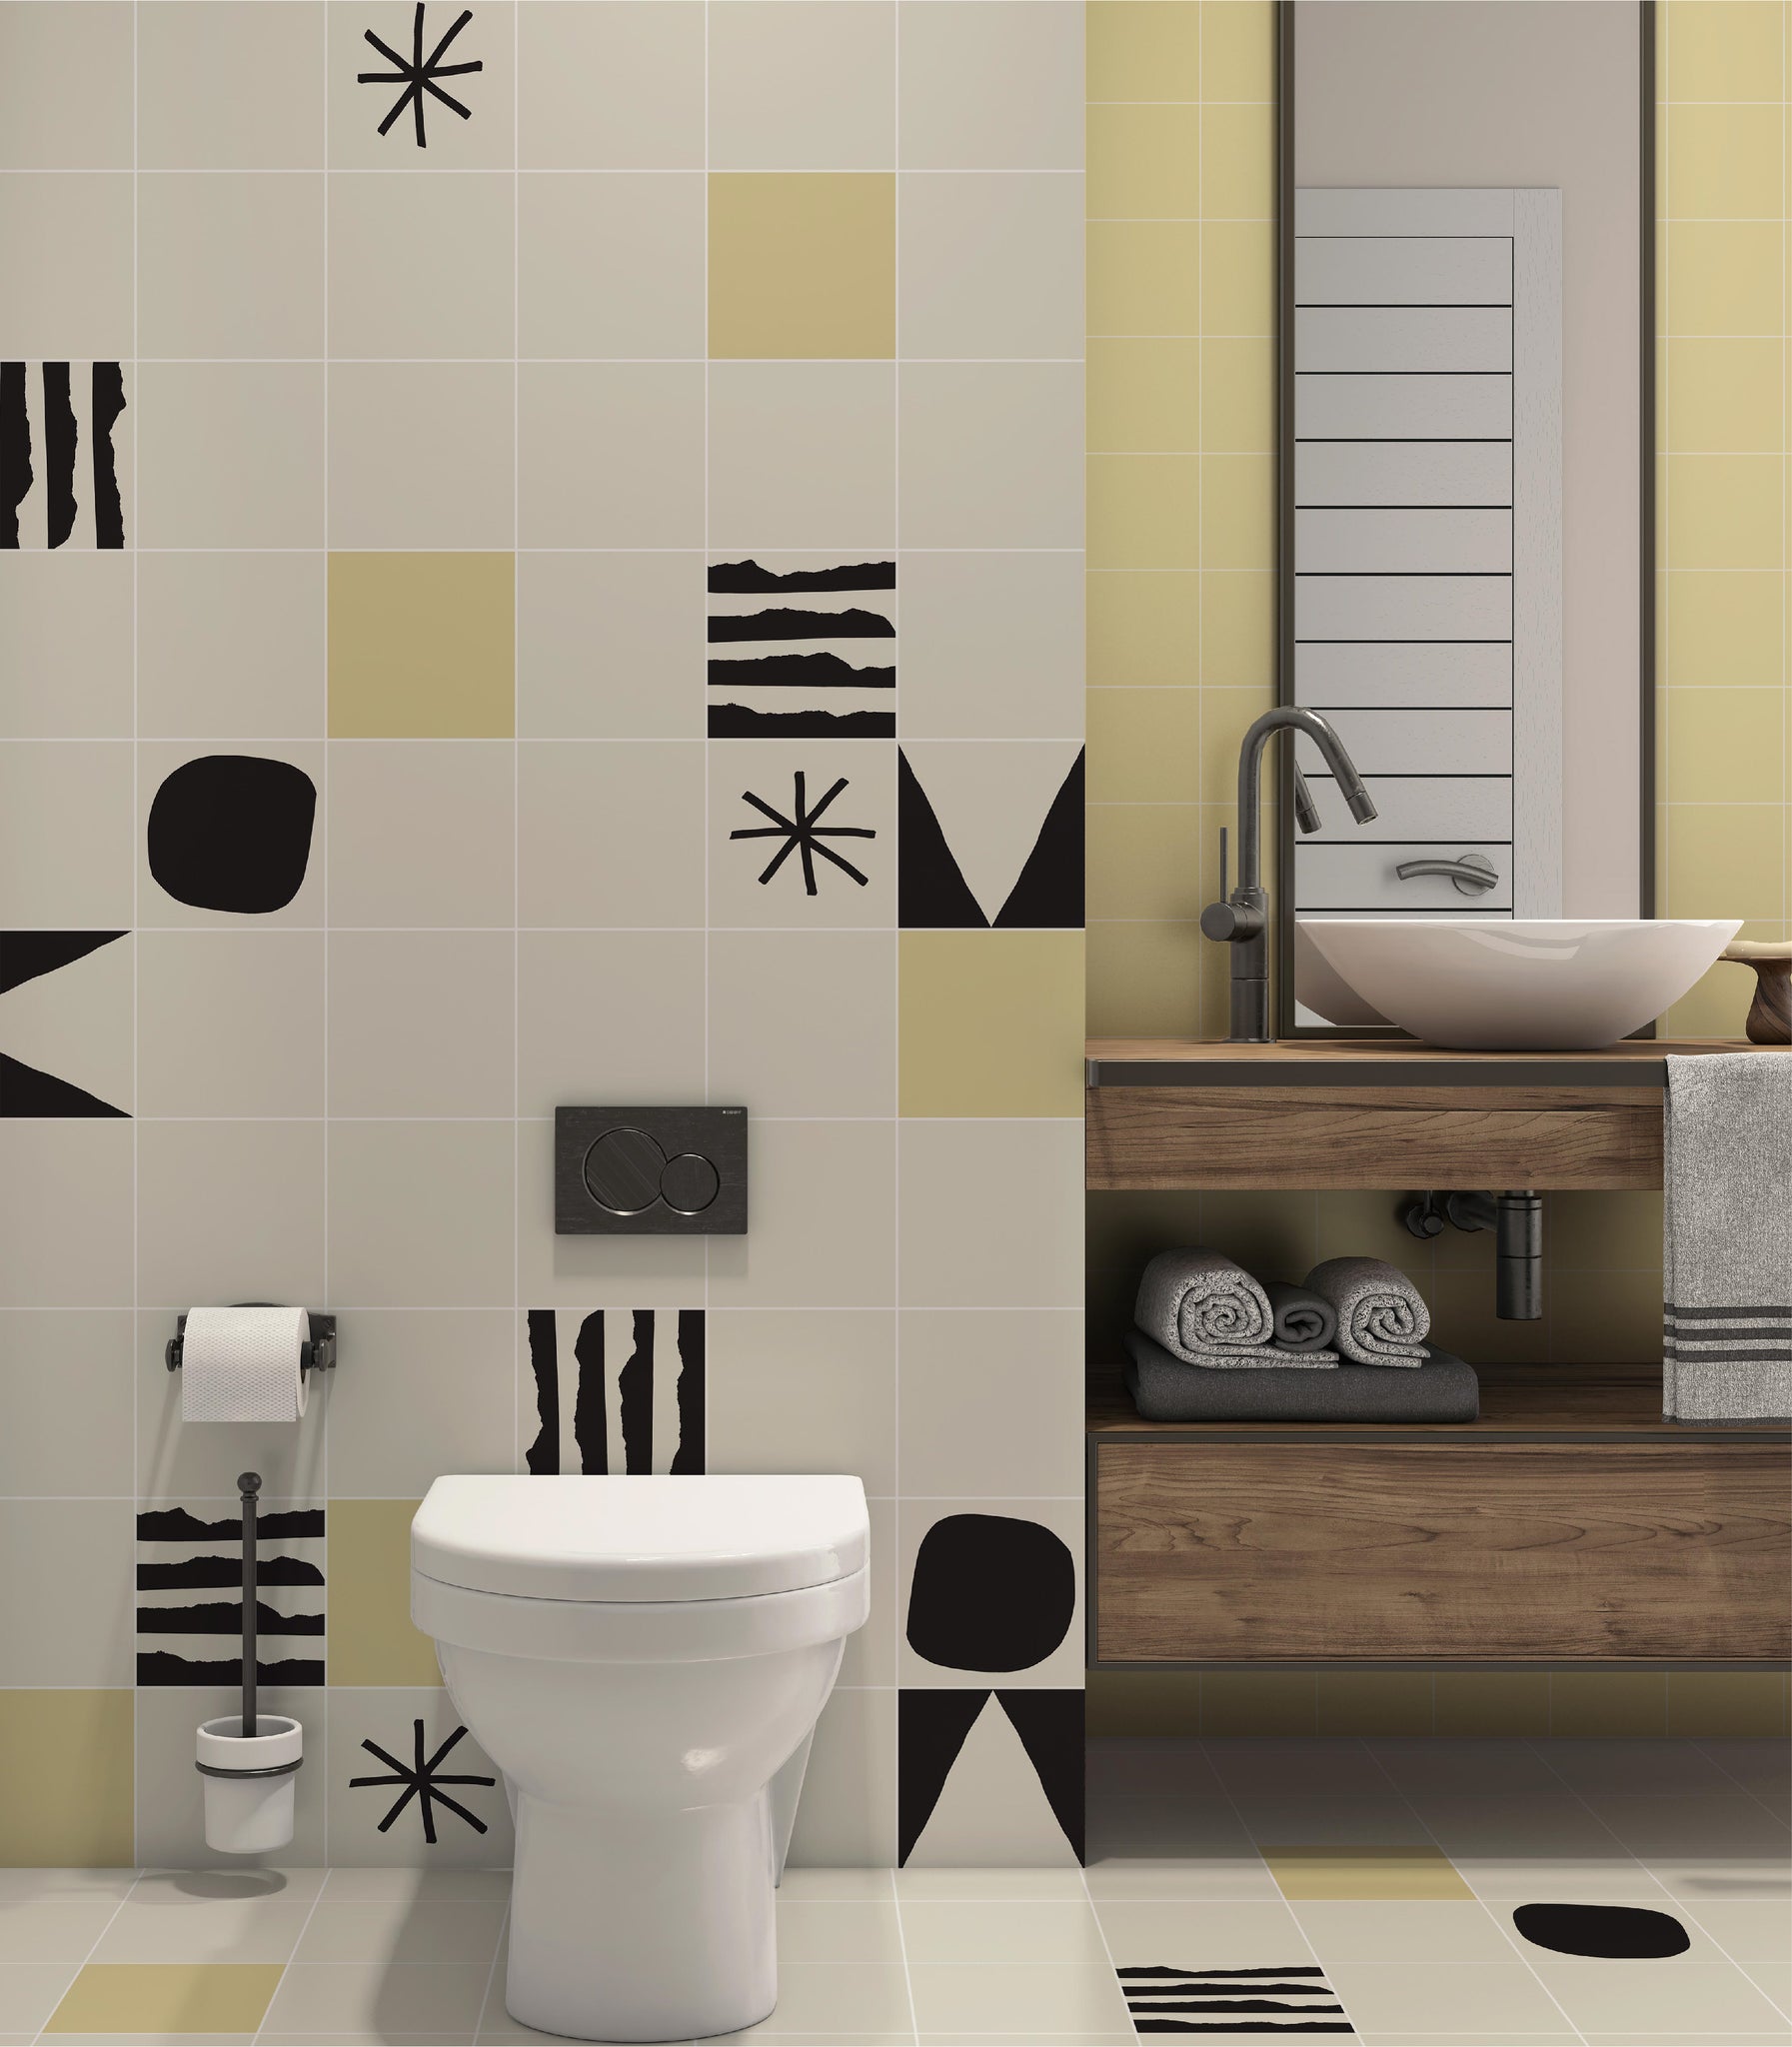 Bathroom with light yellow, white with black designs by clay imports